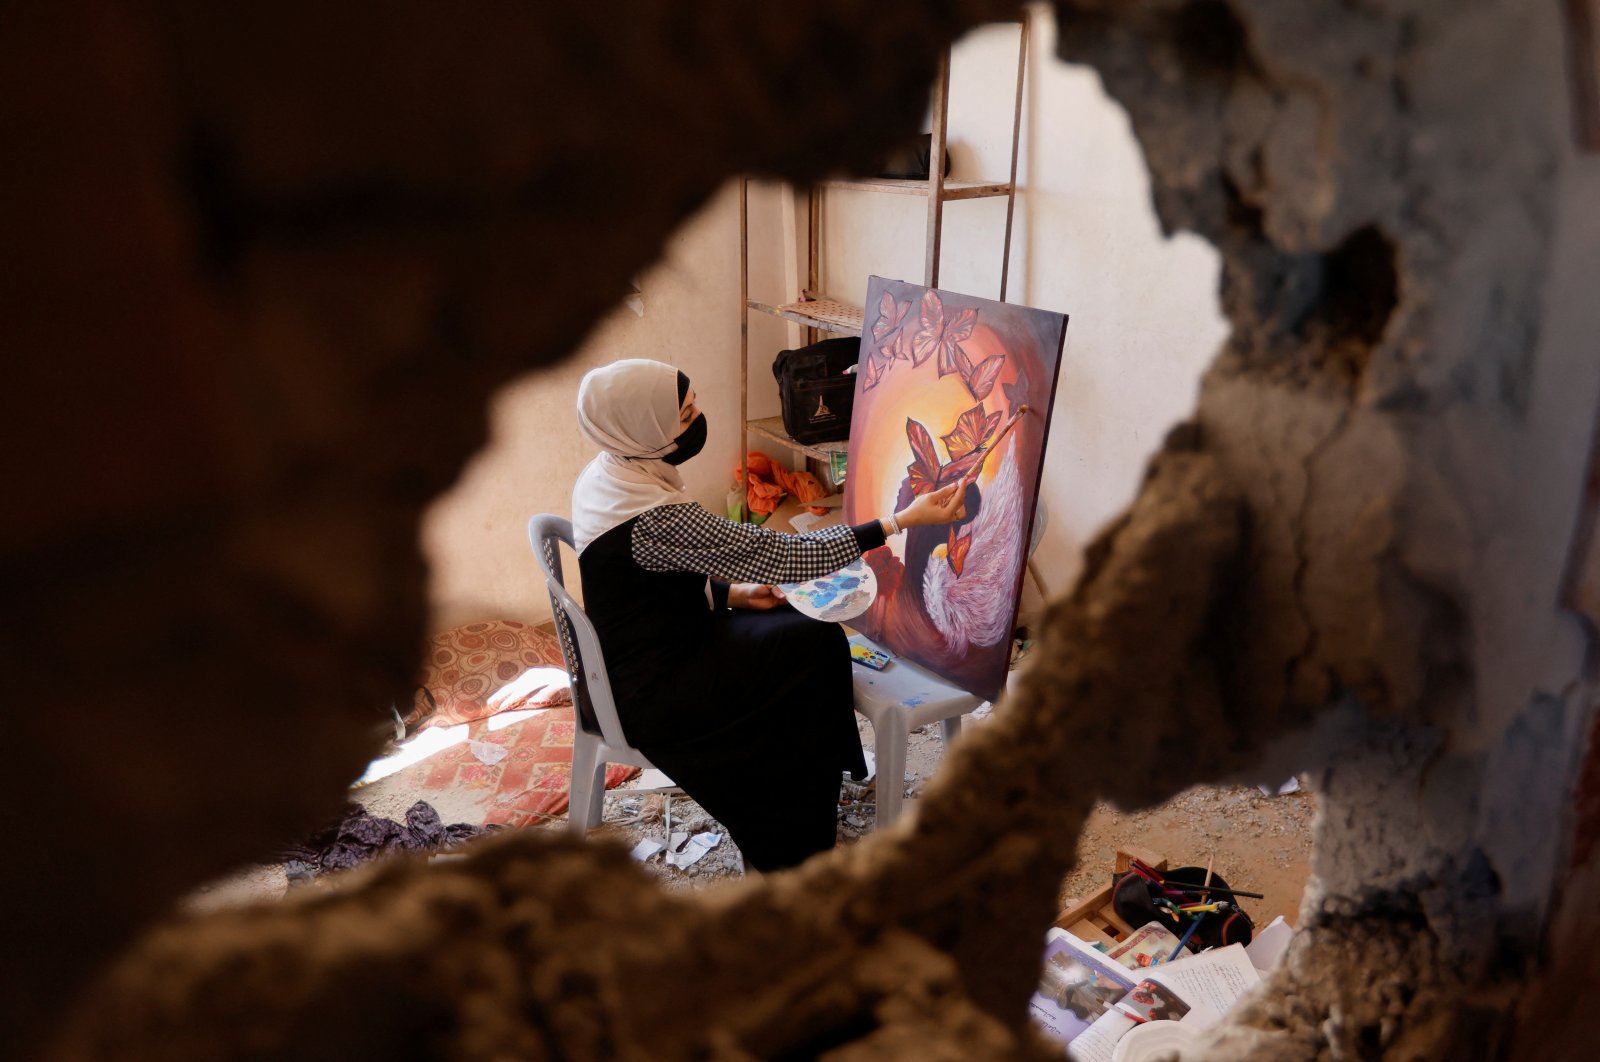 A Palestinian artist draws a painting inside the damaged house of Gaza artist Duniana Al-Amour, who had been killed during the Israel-Gaza fighting earlier this month, in the Gaza Strip, Palestine, Aug. 23, 2022. (Reuters Photo)